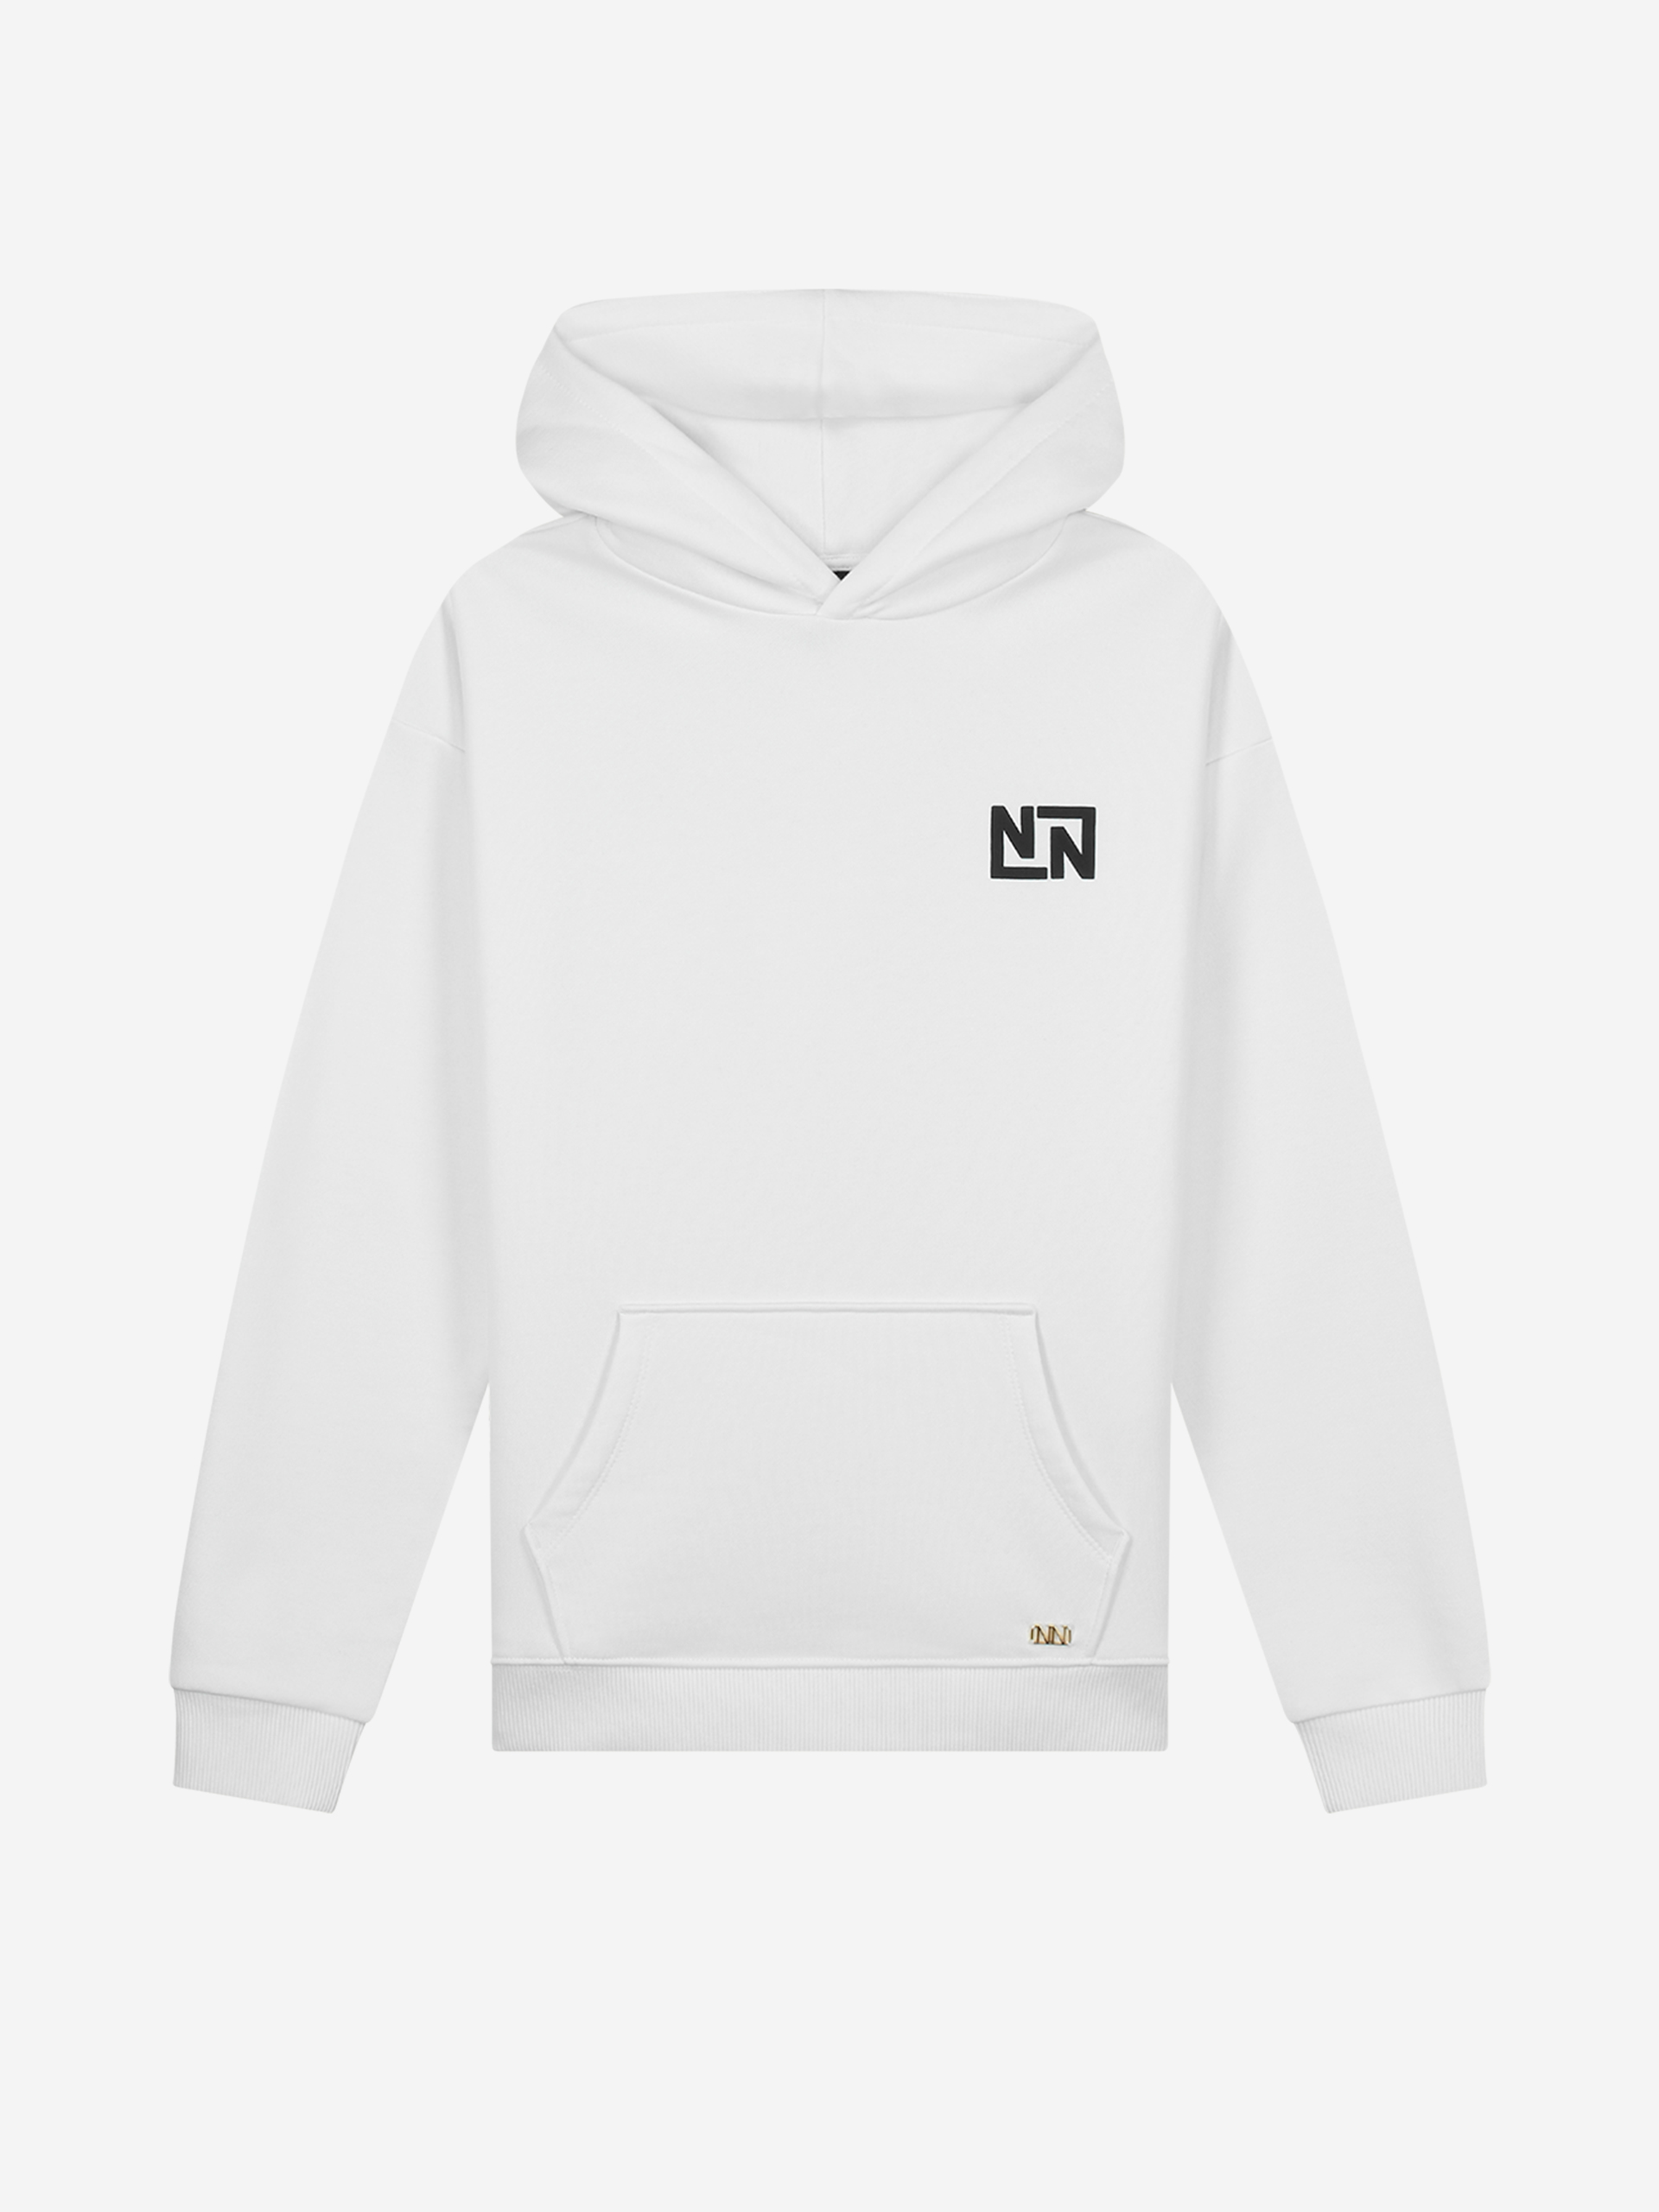 Hoodie with logo on the back 